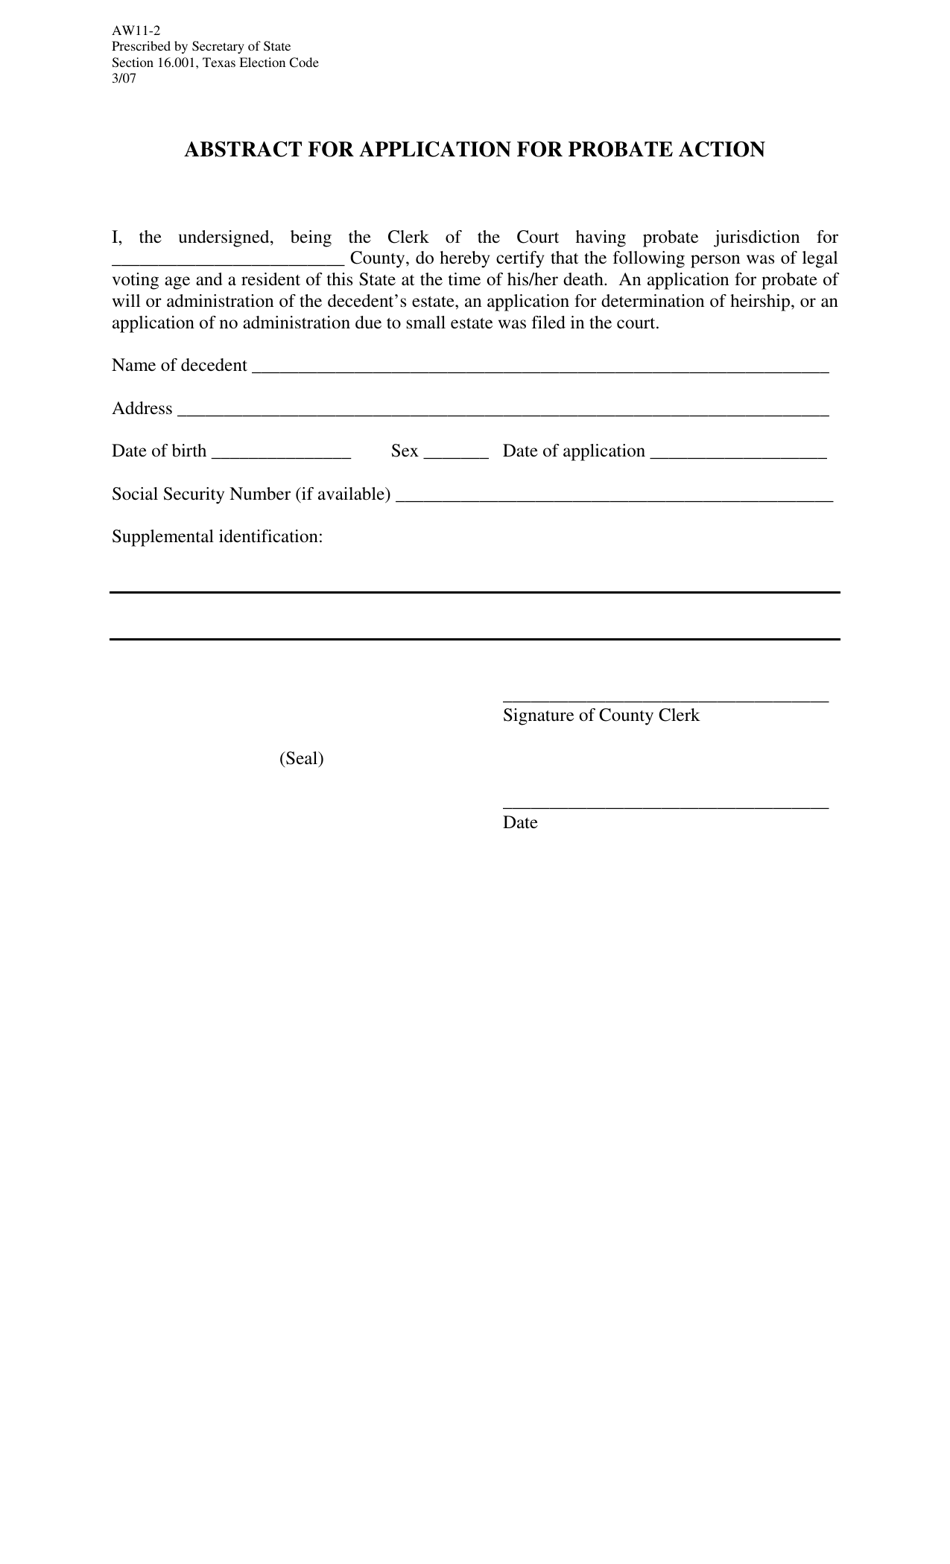 Form AW11-2 Abstract for Application for Probate Action - Texas, Page 1